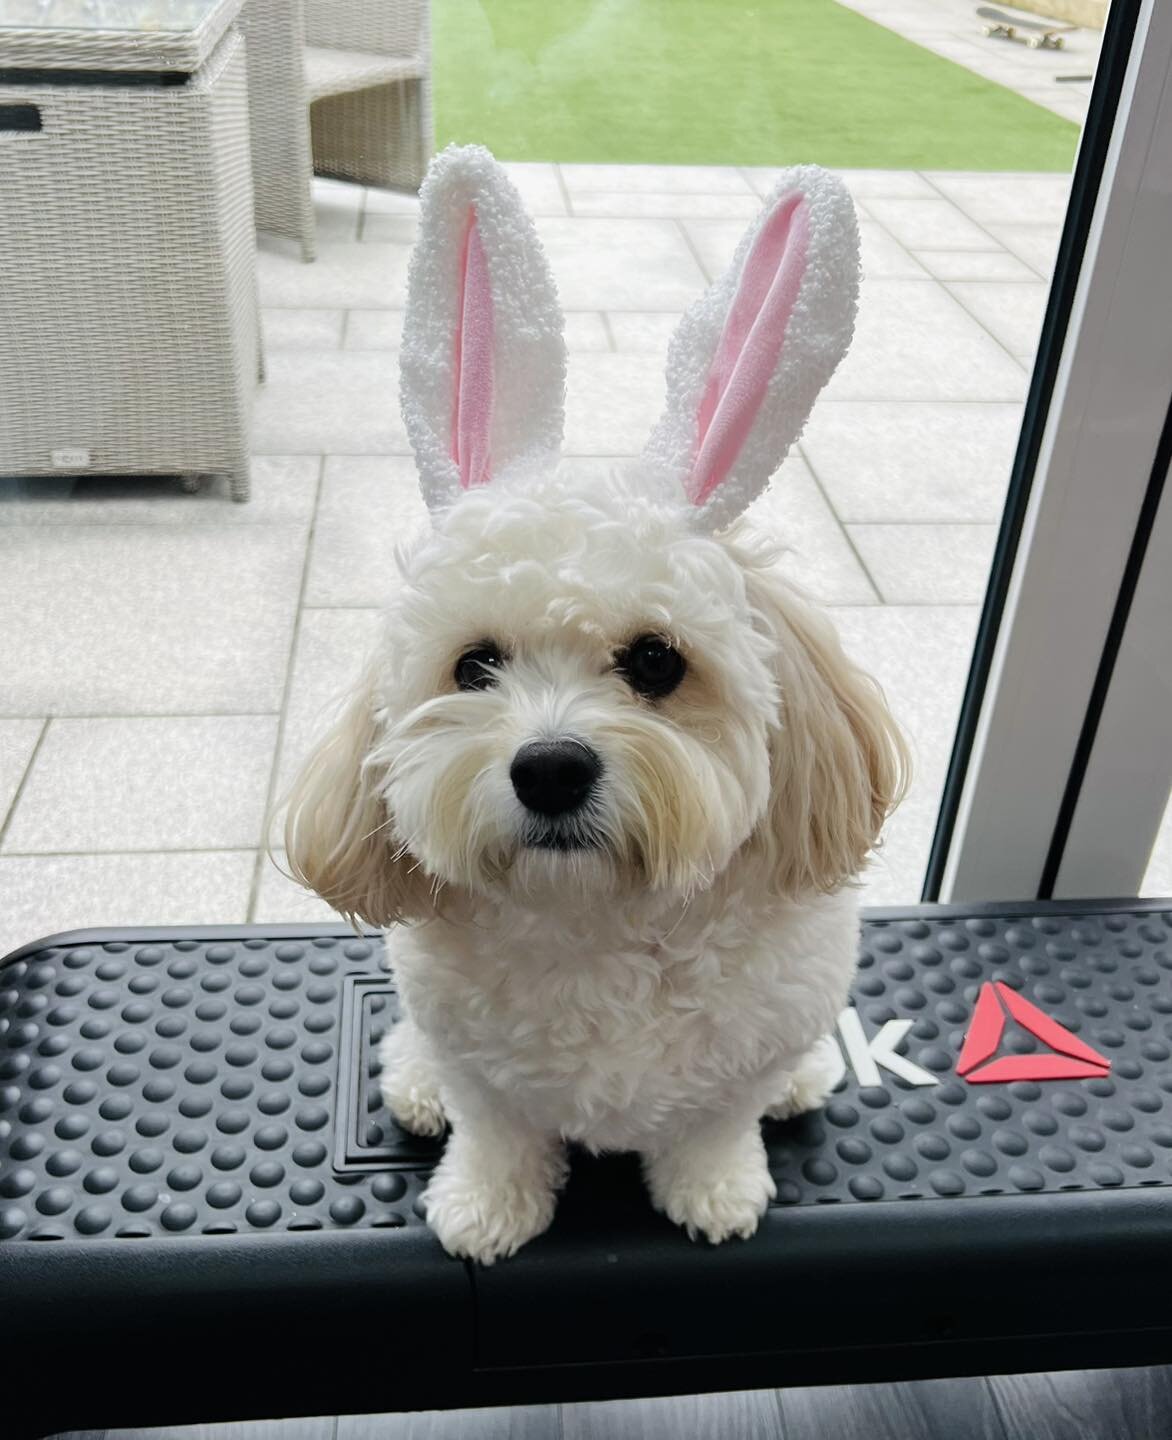 🐣🪺Happy Easter🪺🐣 to all our customers and followers.
We are now closed for a well deserved Easter break and re-open on the 8th of April.

Customer services will be covered by Bob&hellip;&hellip;

#cavachonsofinstagram #cavachon #security #electri